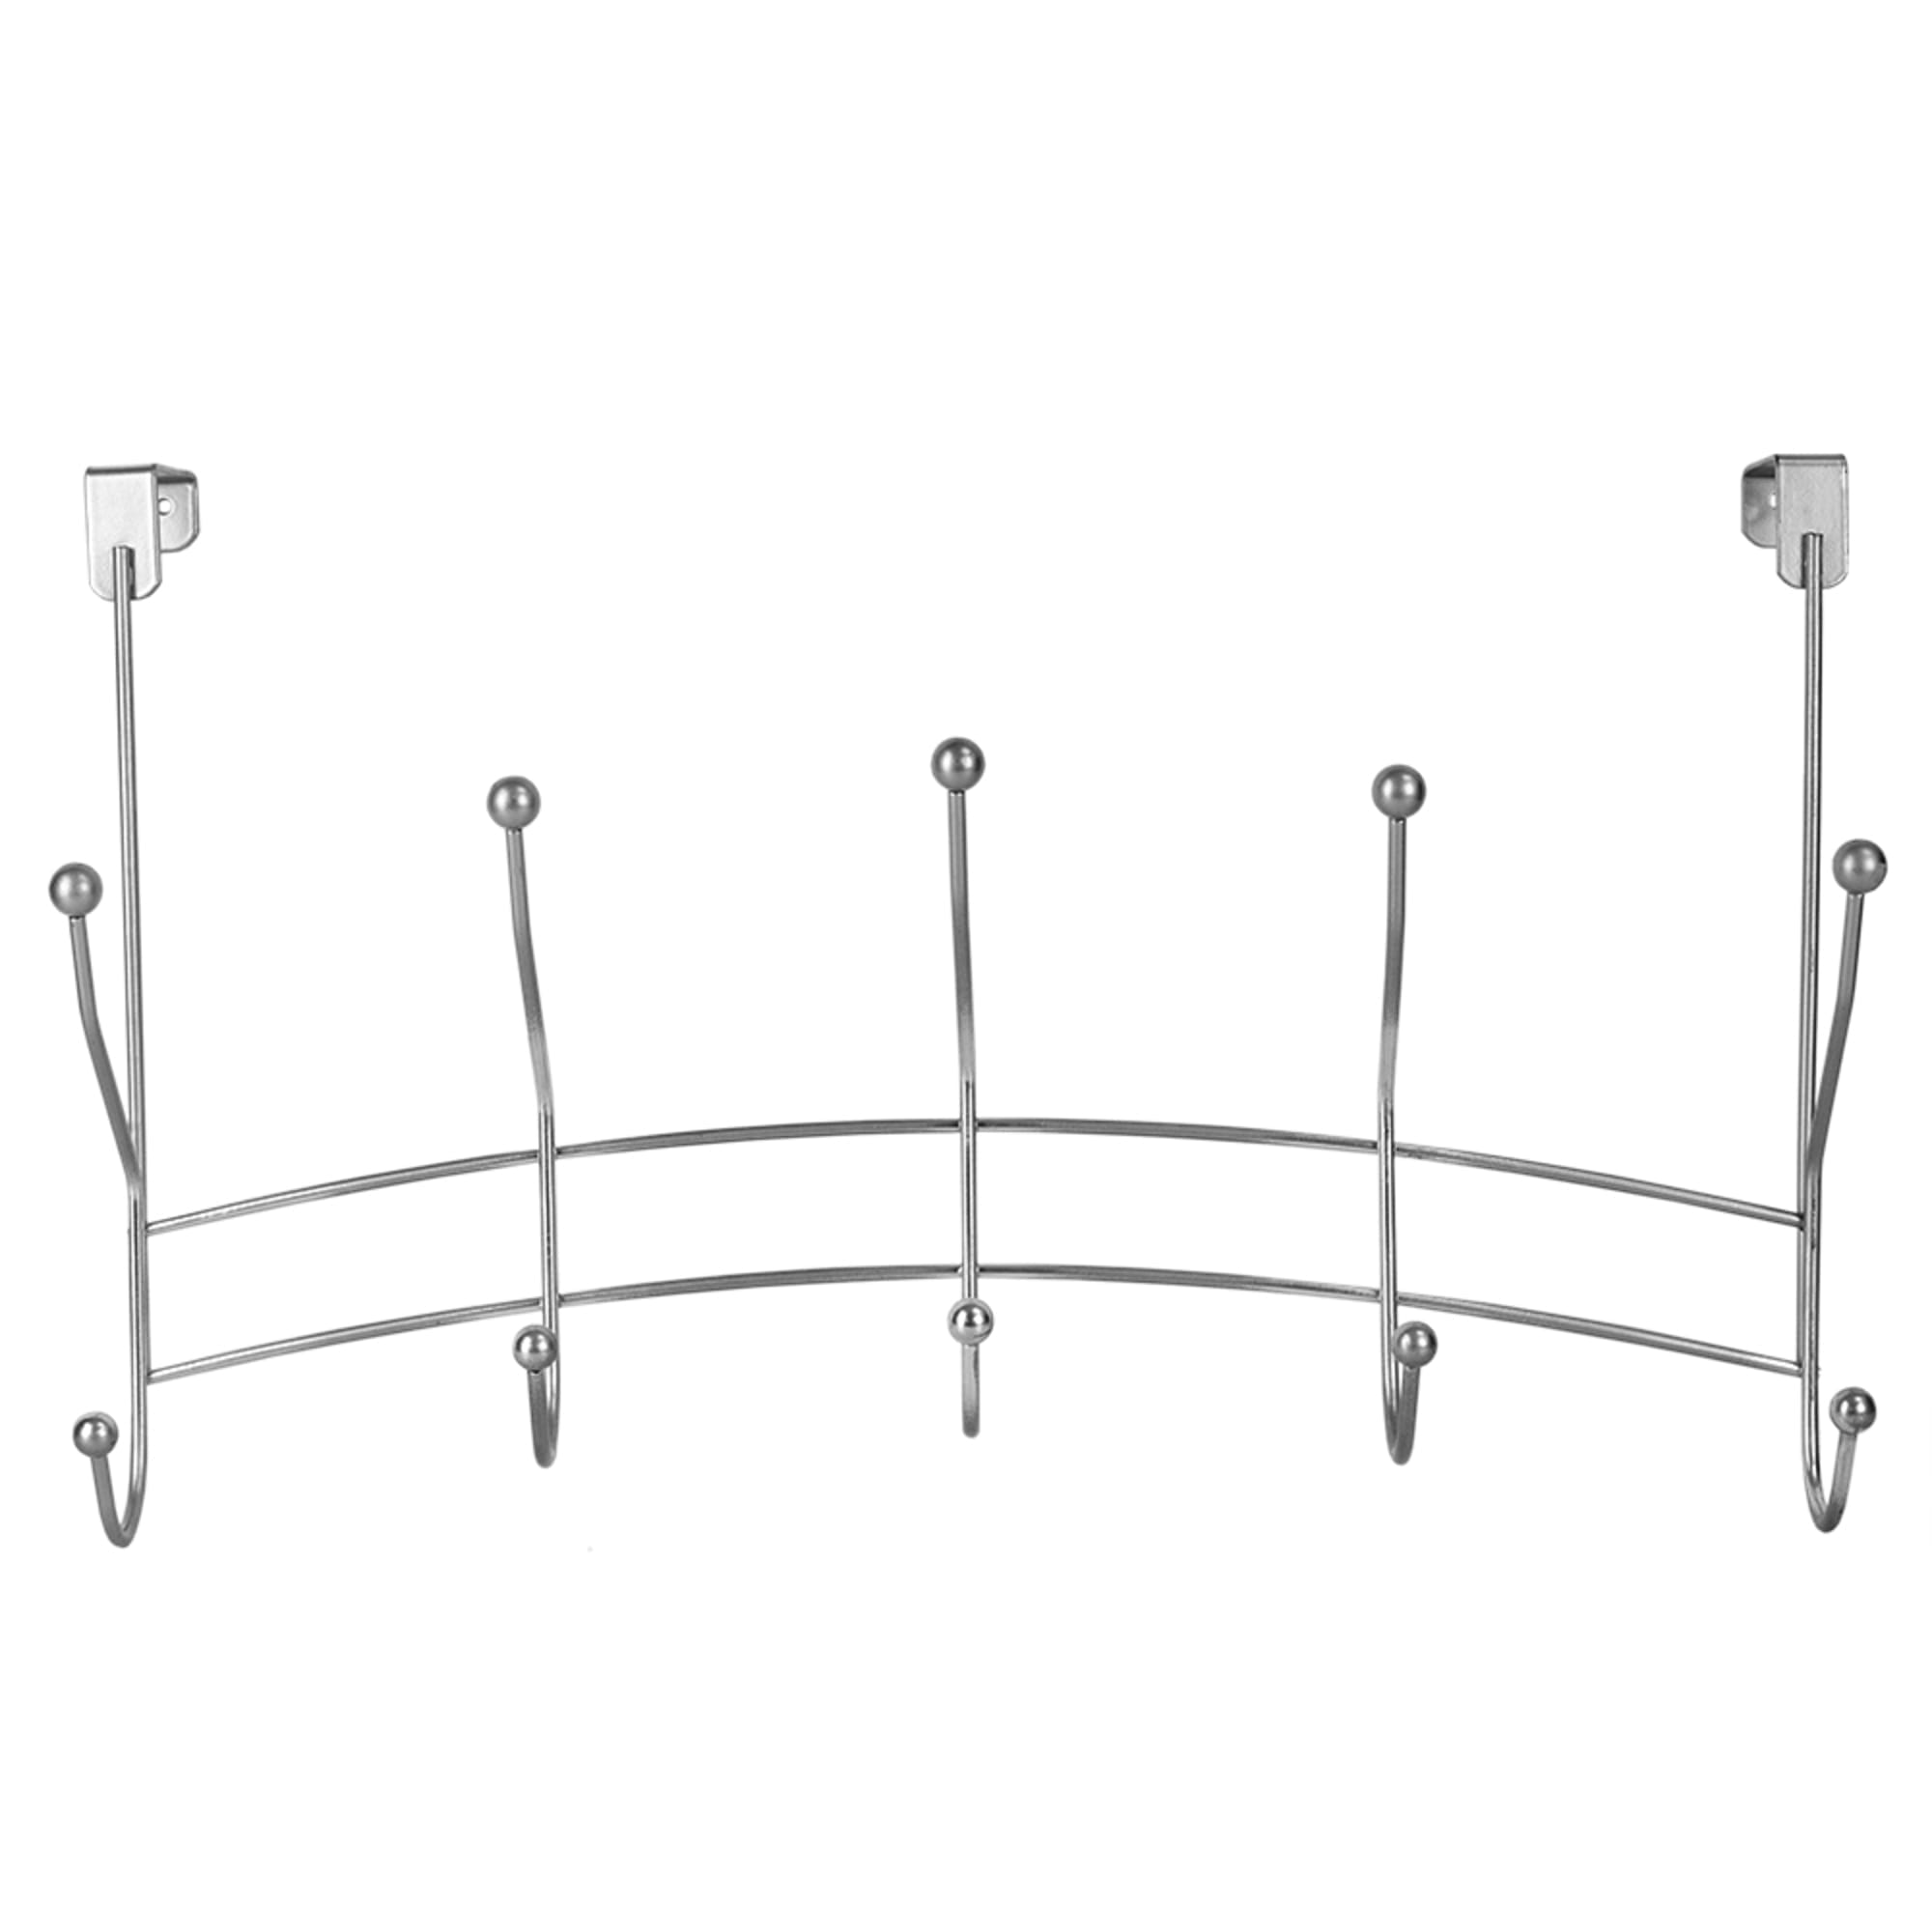 Home Basics 5 Dual Hook Over the Door Hanging Rack, Silver $5.00 EACH, CASE PACK OF 12